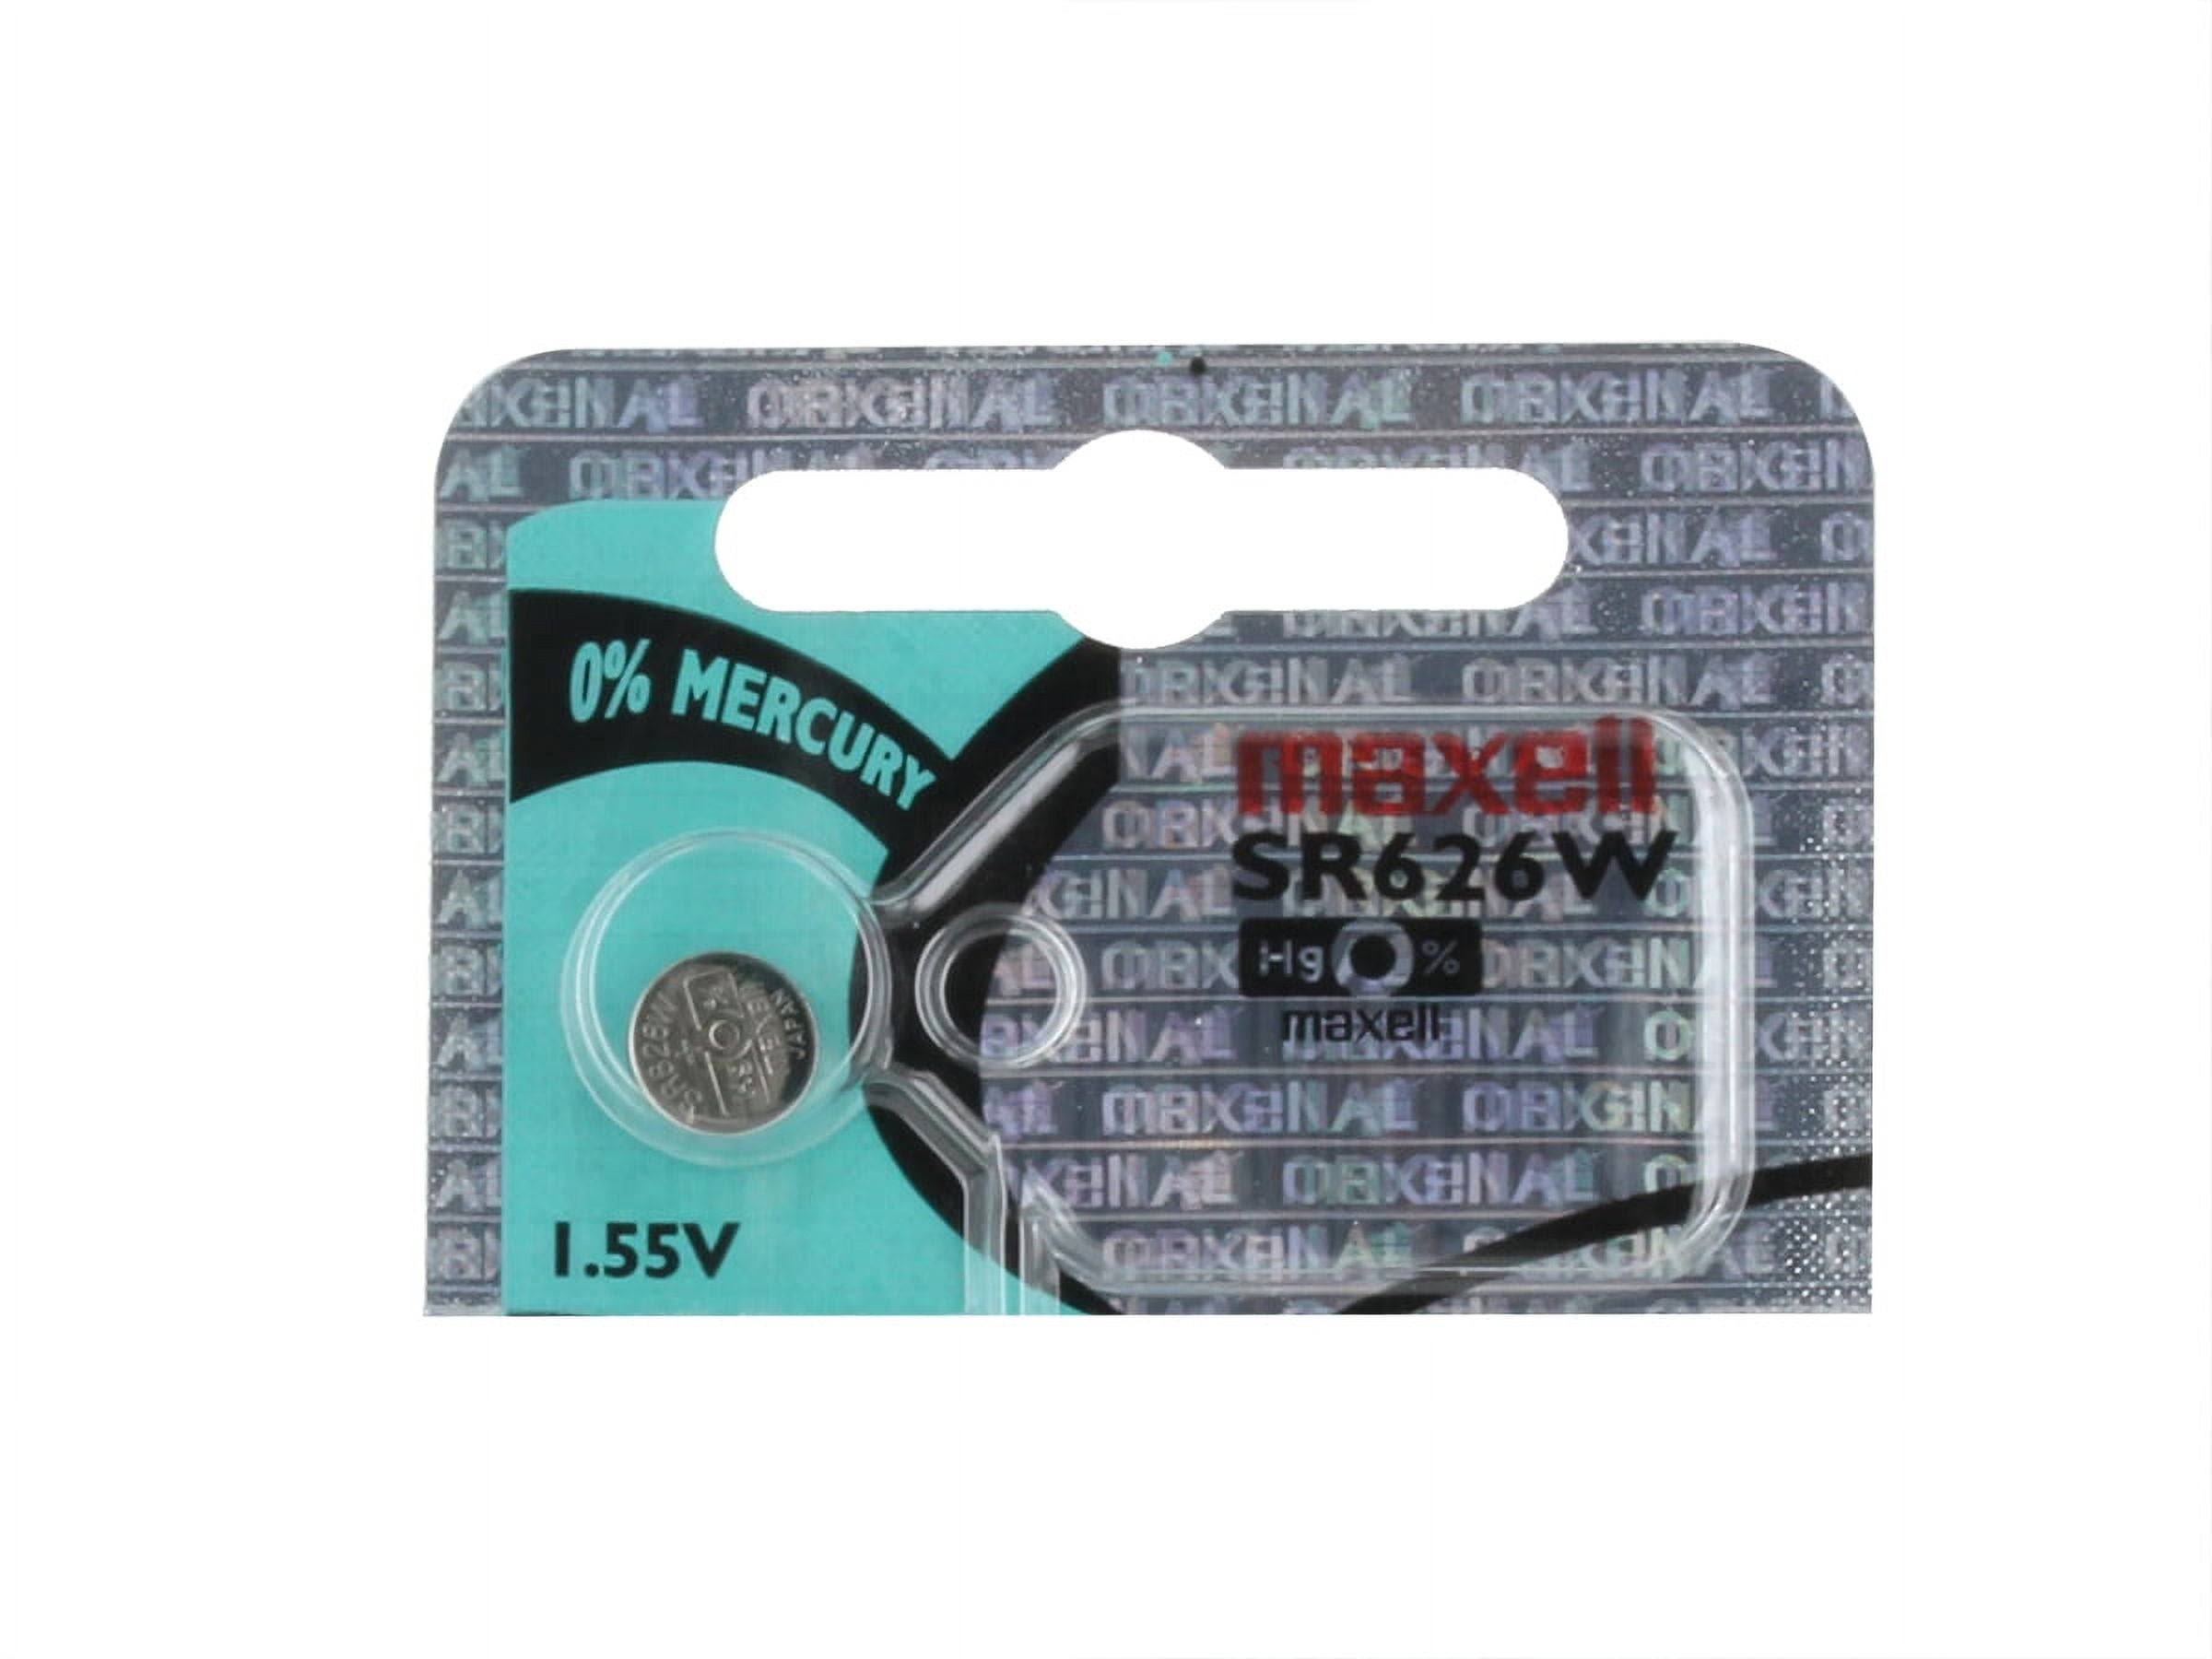 Maxell 376 SR626W 28mAh 1.55V Silver Oxide Button Cell Battery - Default Title